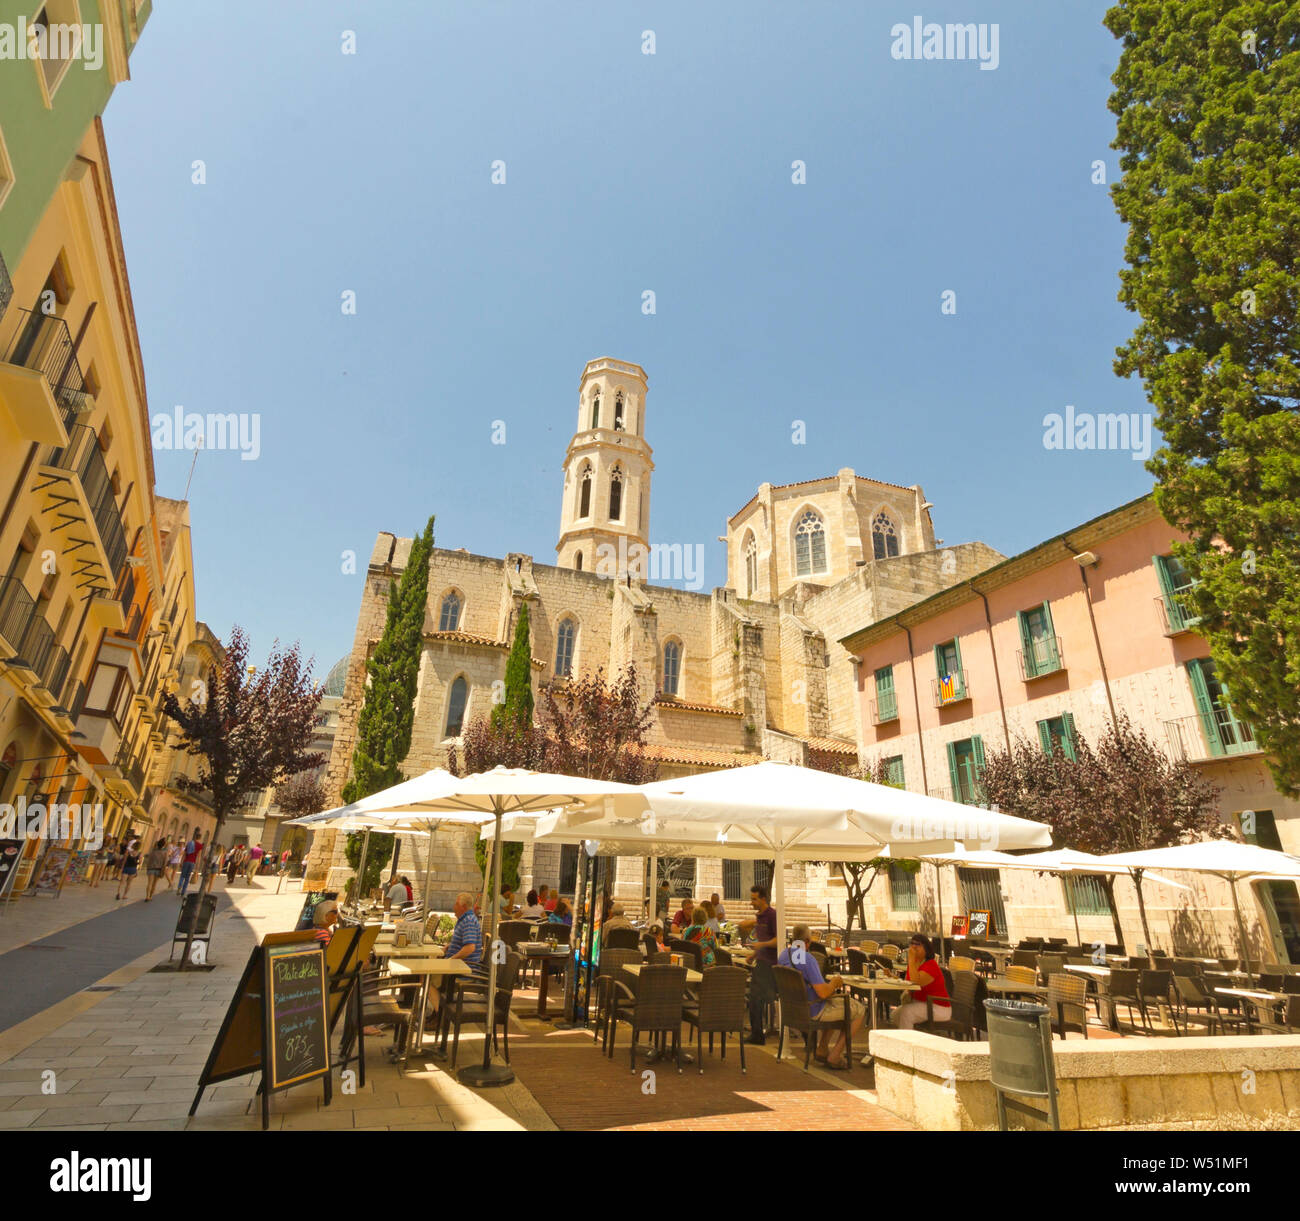 FIGUERES, SPAIN - JUNE 14: Tourist on Main square, Figueres, Spain. Tourists in the church square in Figueres. In the background, the Dali Museum Stock Photo